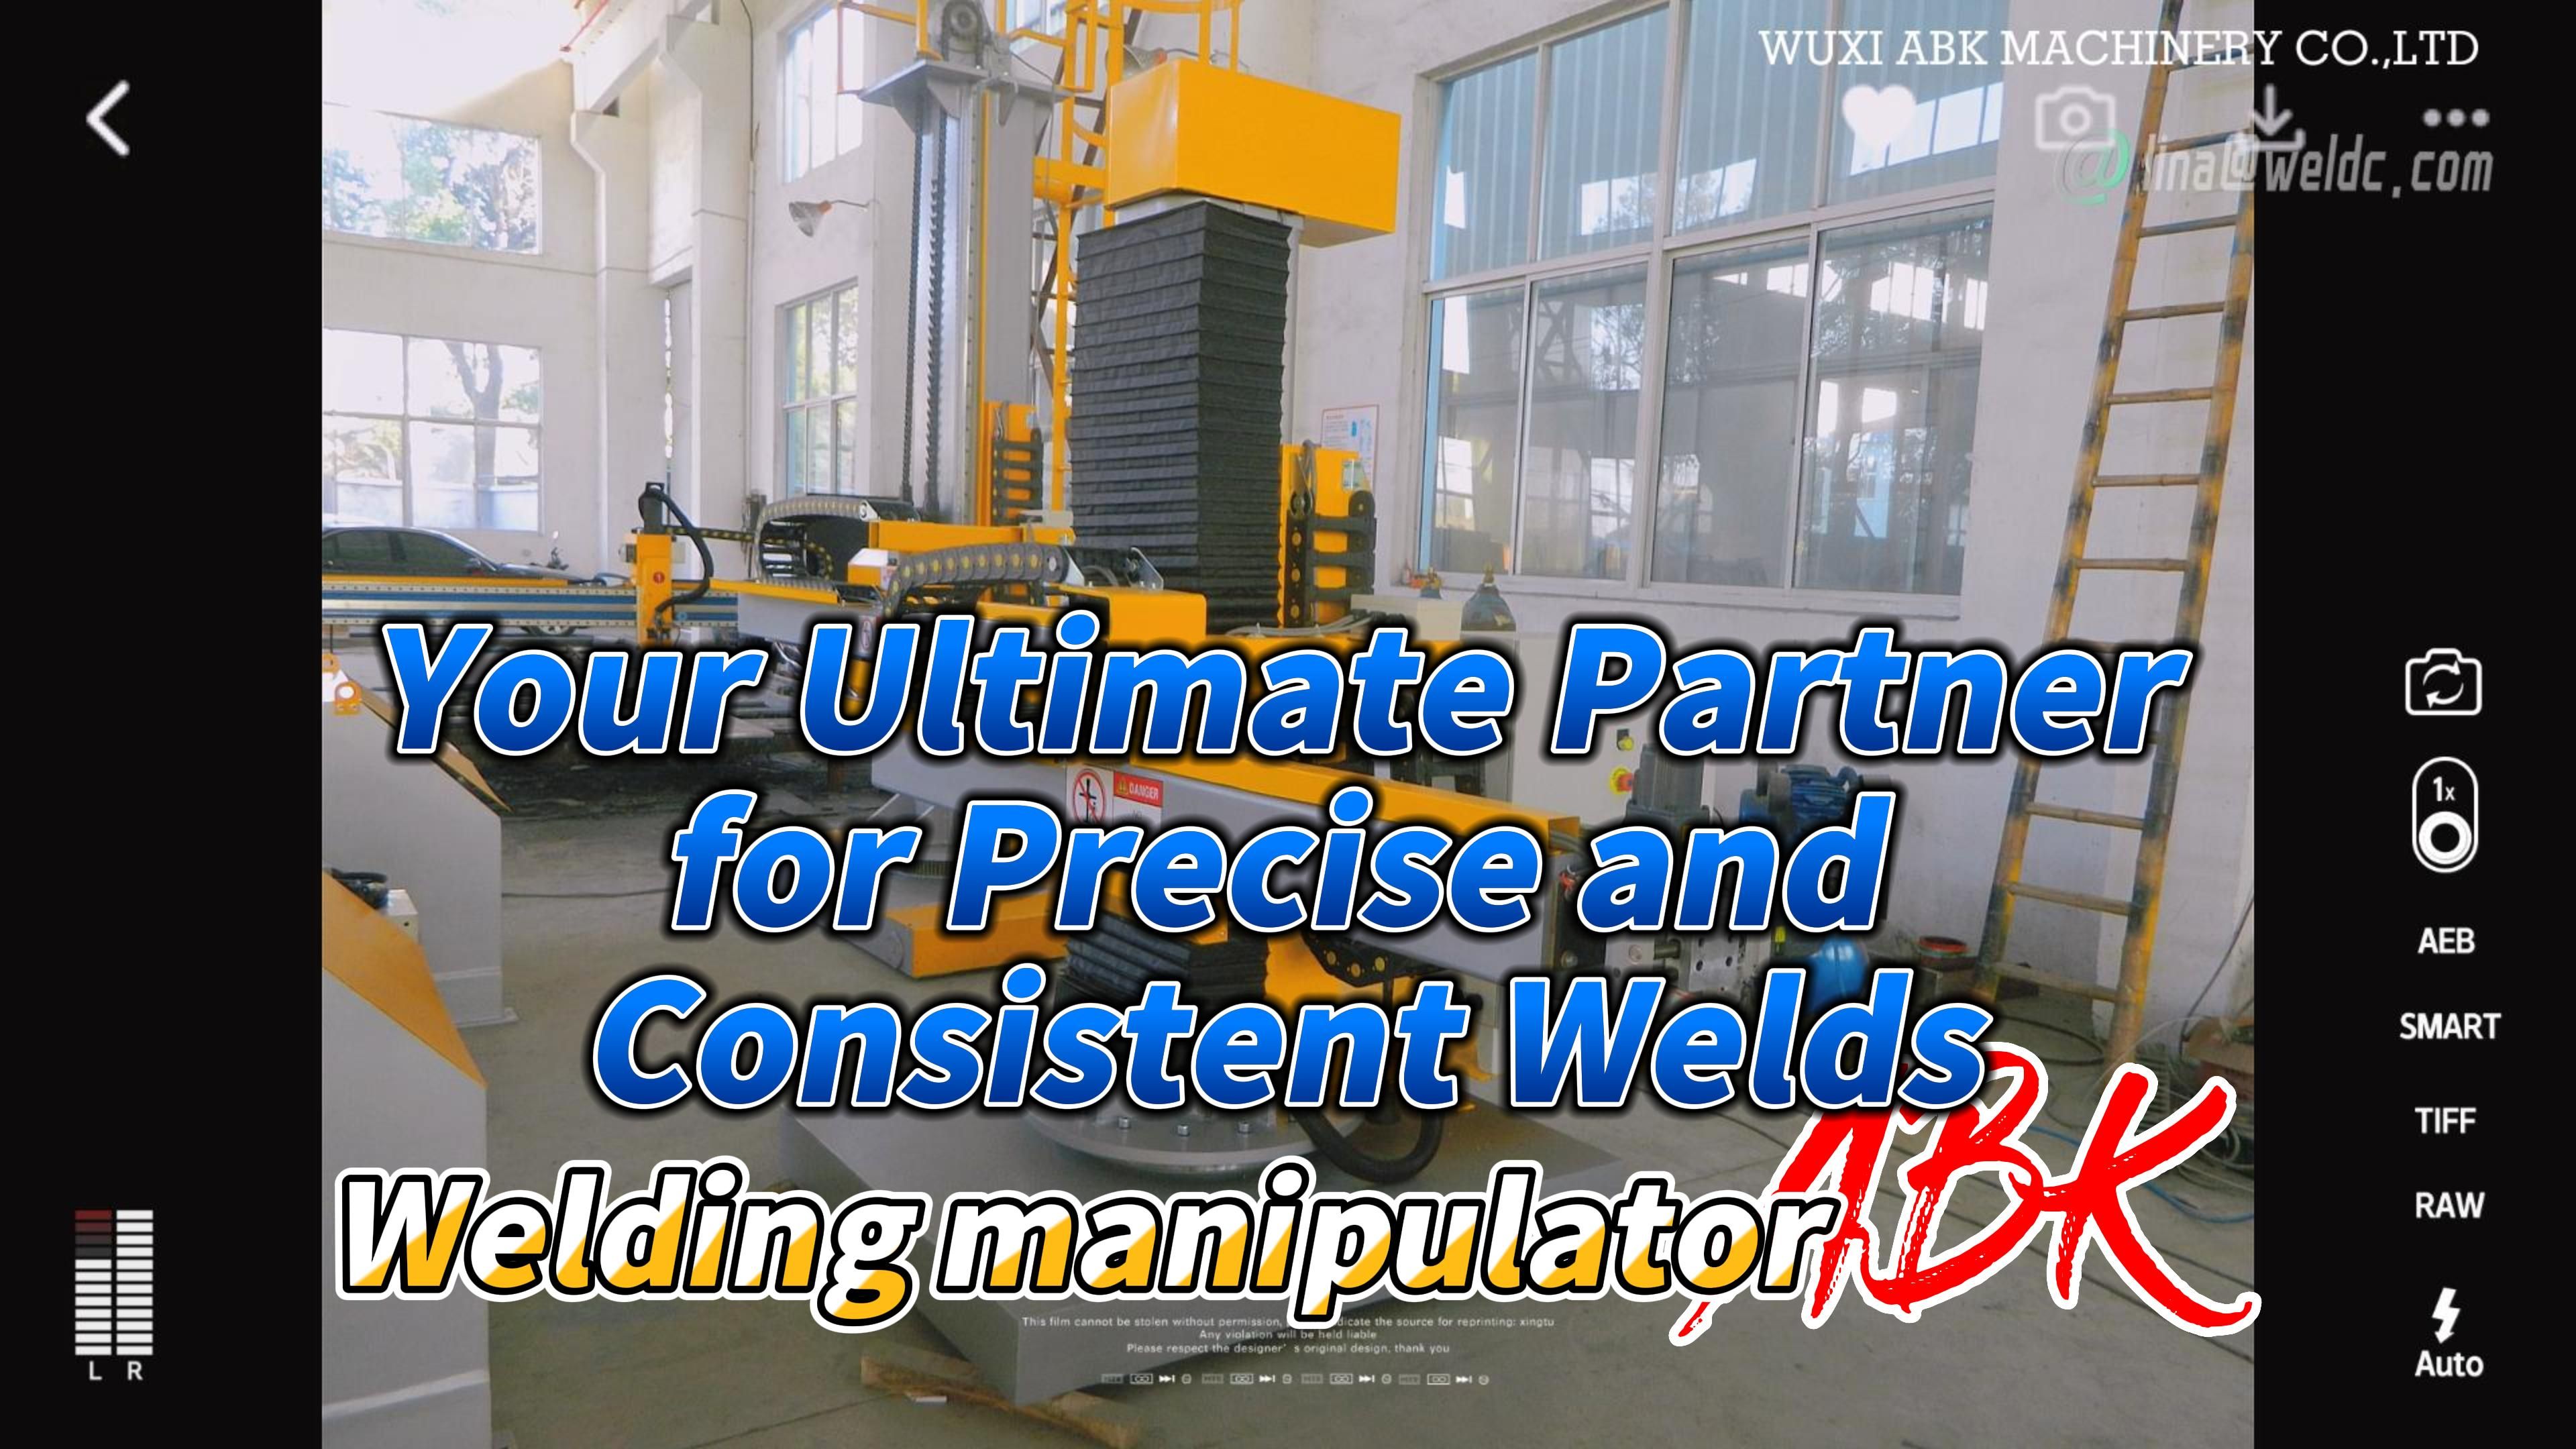 Welding Manipulator: a powerful assistant to realize efficient welding and manufacturing